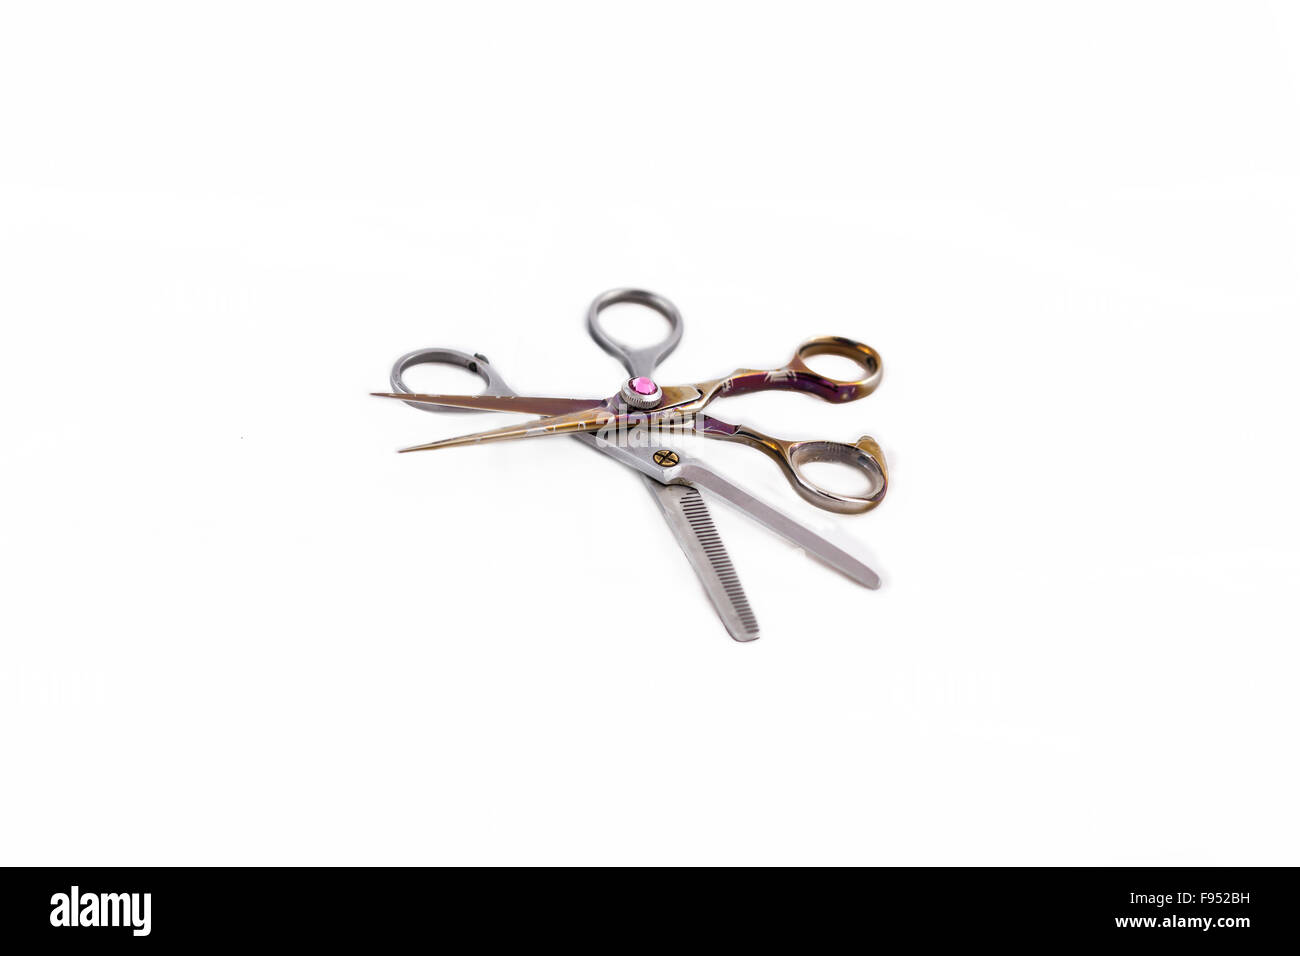 hairdressing scissors and combs for hair cut Stock Photo